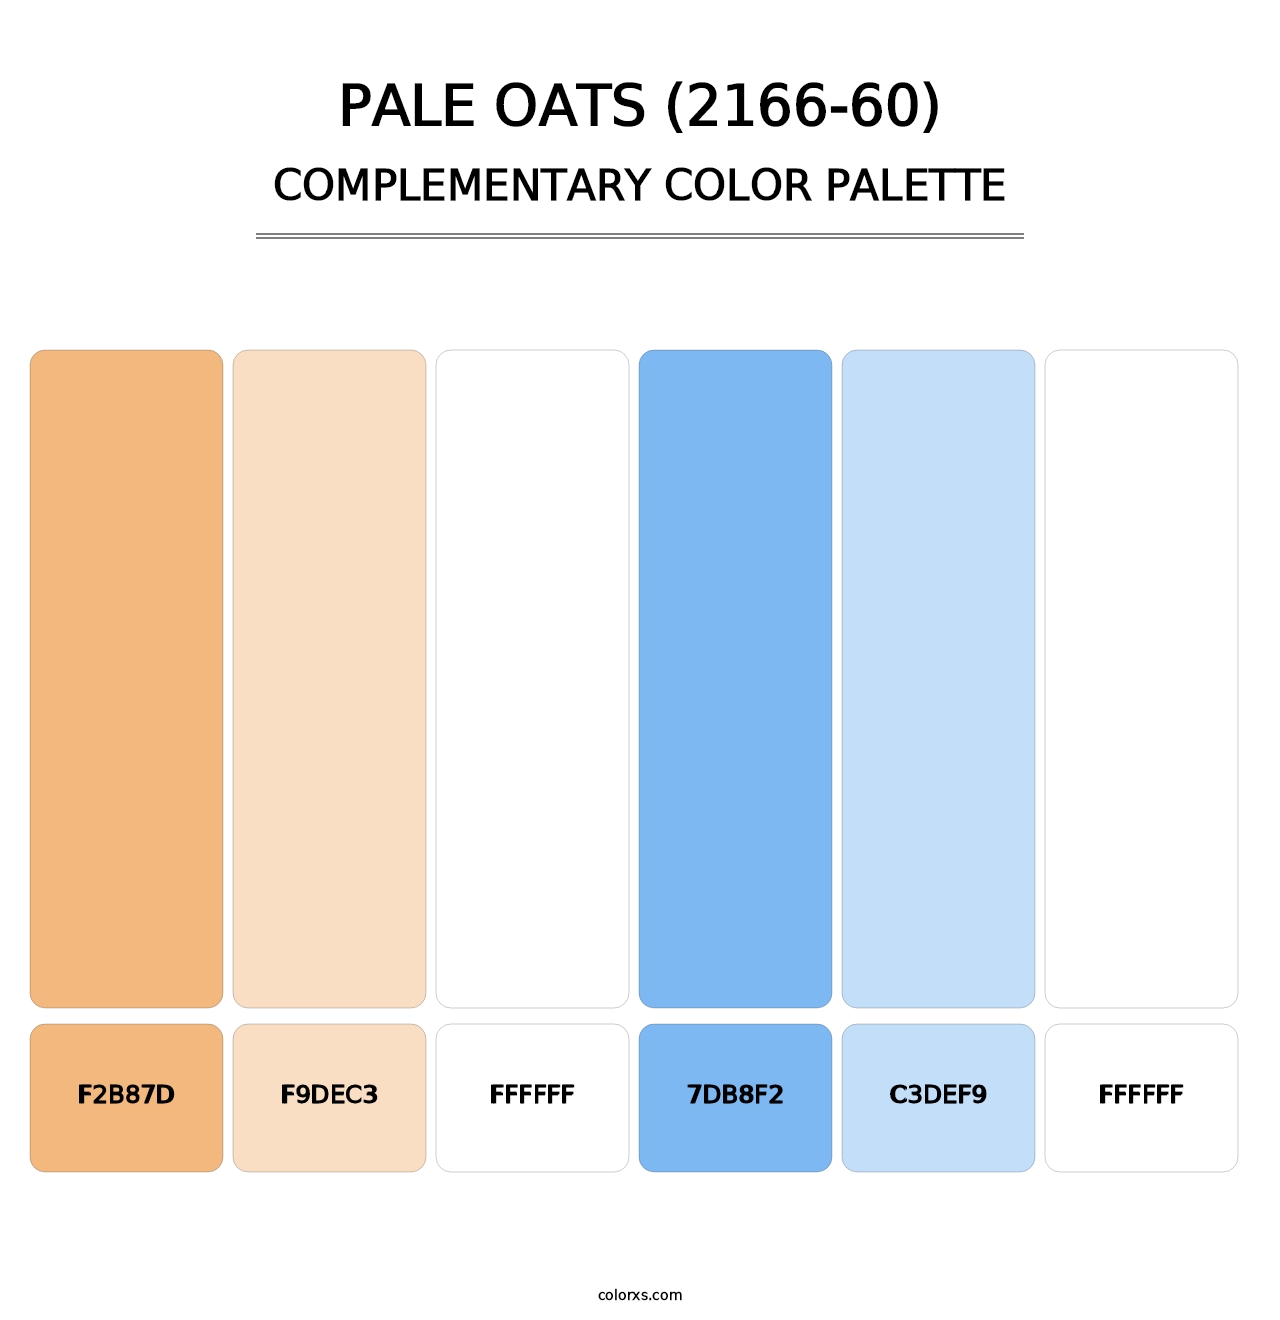 Pale Oats (2166-60) - Complementary Color Palette